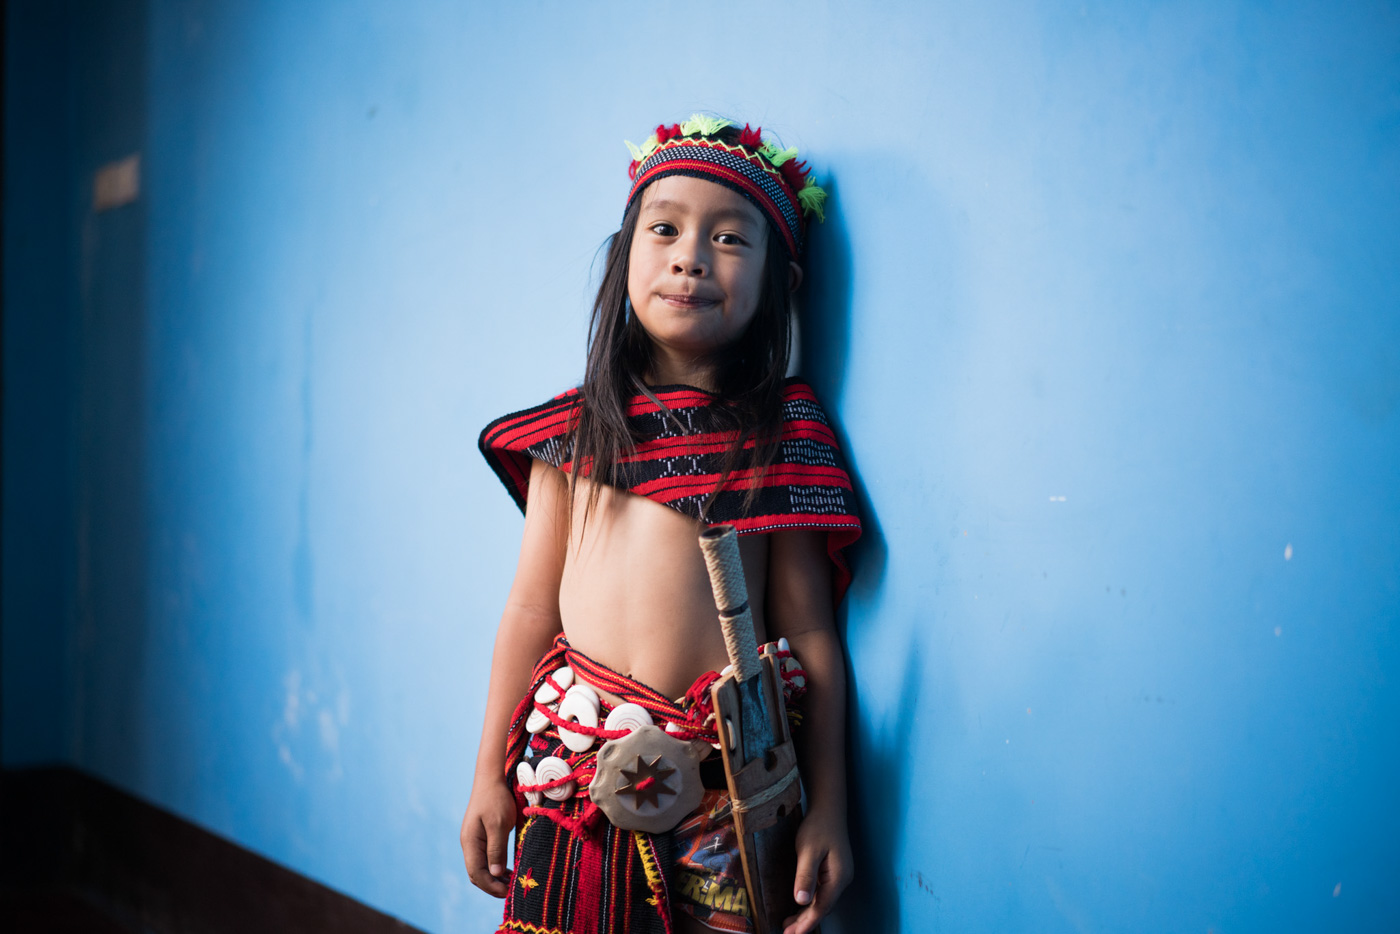 COMING-OF-AGE. Coda poses wearing traditional Ifugao attire before his haircutting ceremony. All photos by Martin San Diego/Rappler 